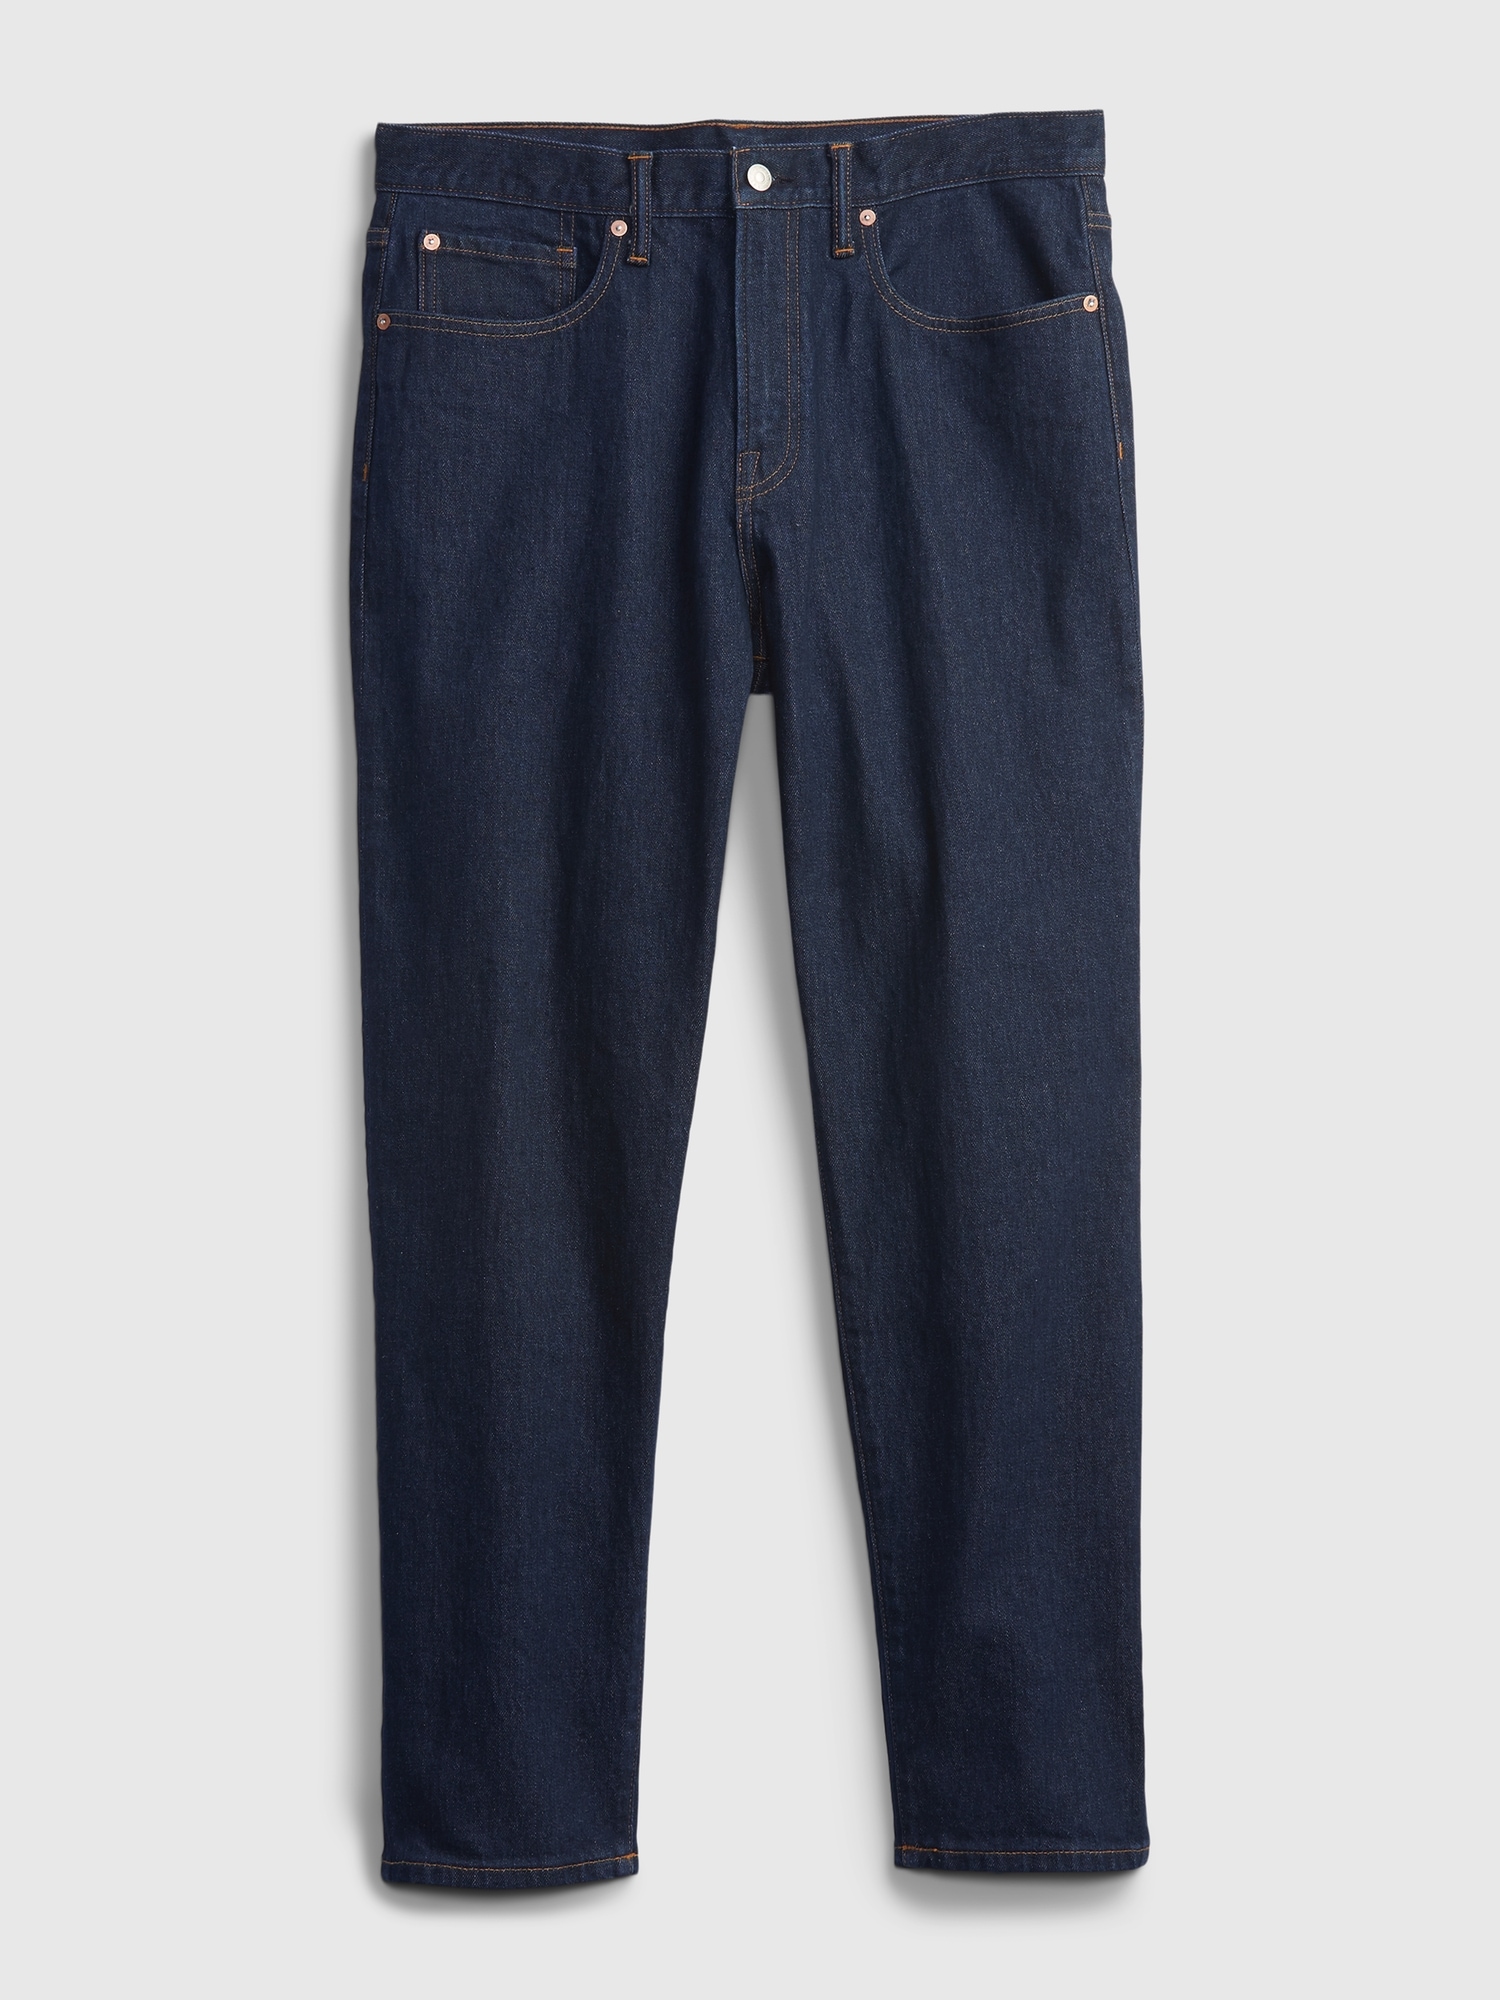 Gap Relaxed Taper Jeans in GapFlex